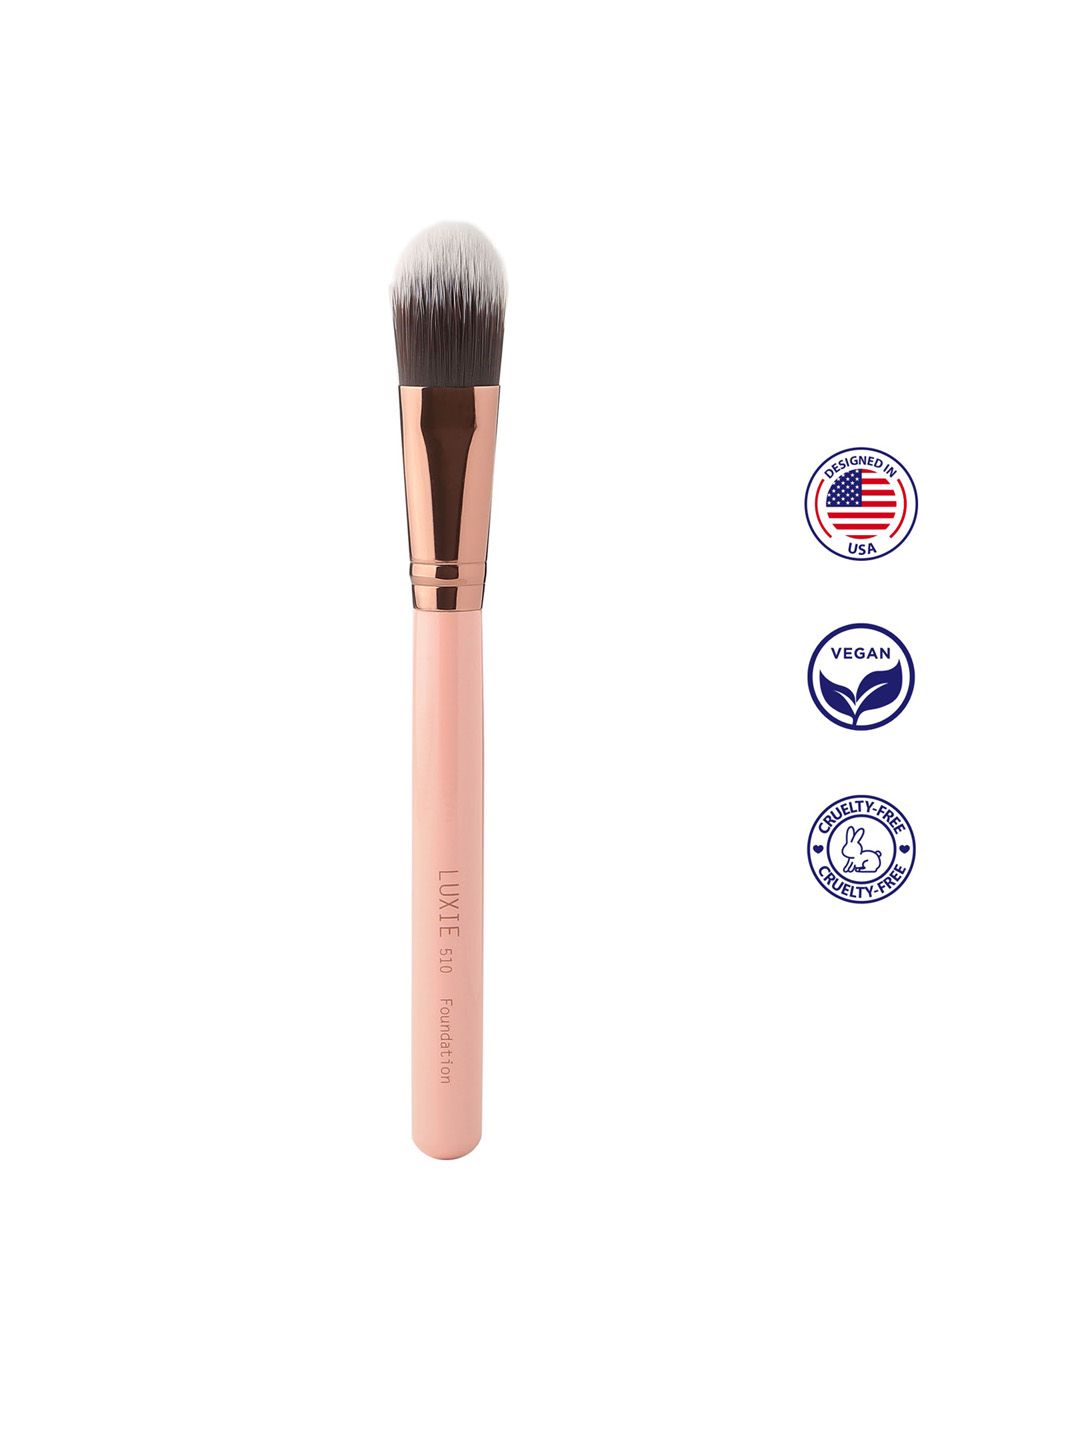 LUXIE Rose Gold Foundation Brush - 510 Price in India